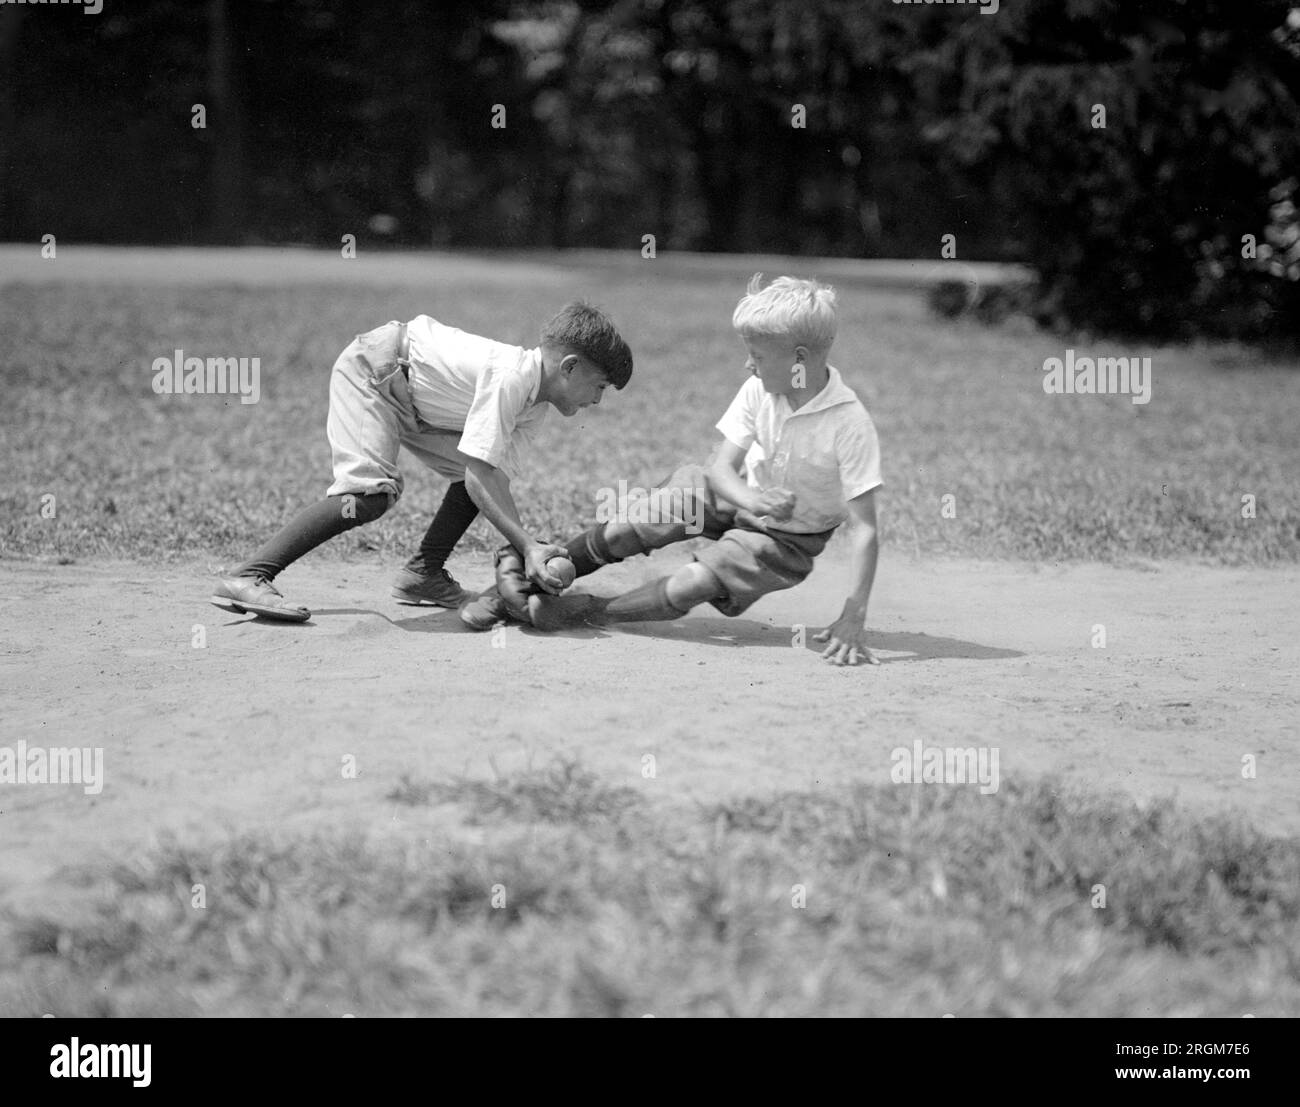 Two young boys playing baseball, an infielder tags a runner out ca. 1925 Stock Photo